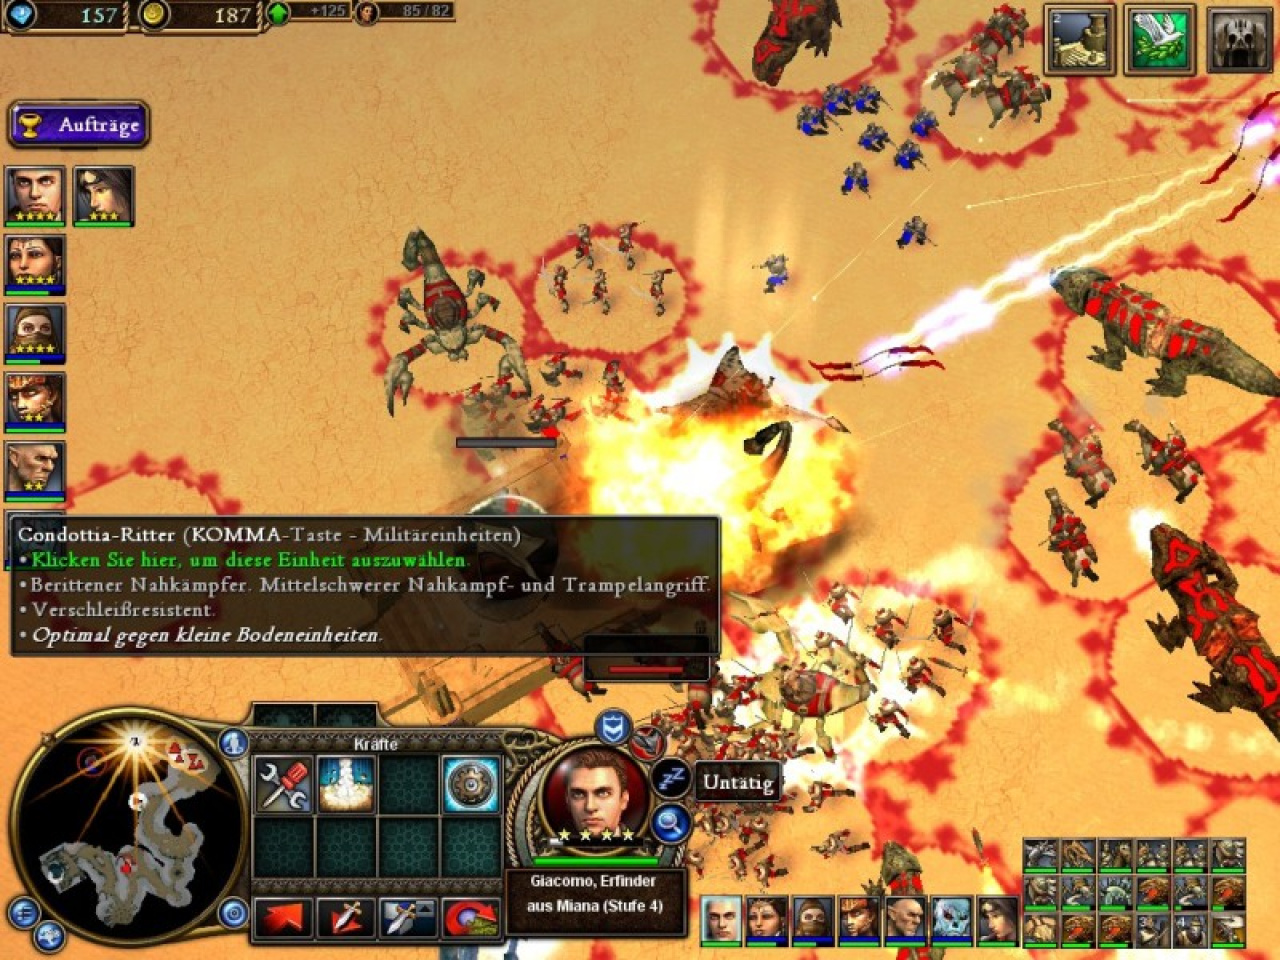 Rise of Nations: Rise of Legends  Video Game Reviews and Previews PC, PS4,  Xbox One and mobile